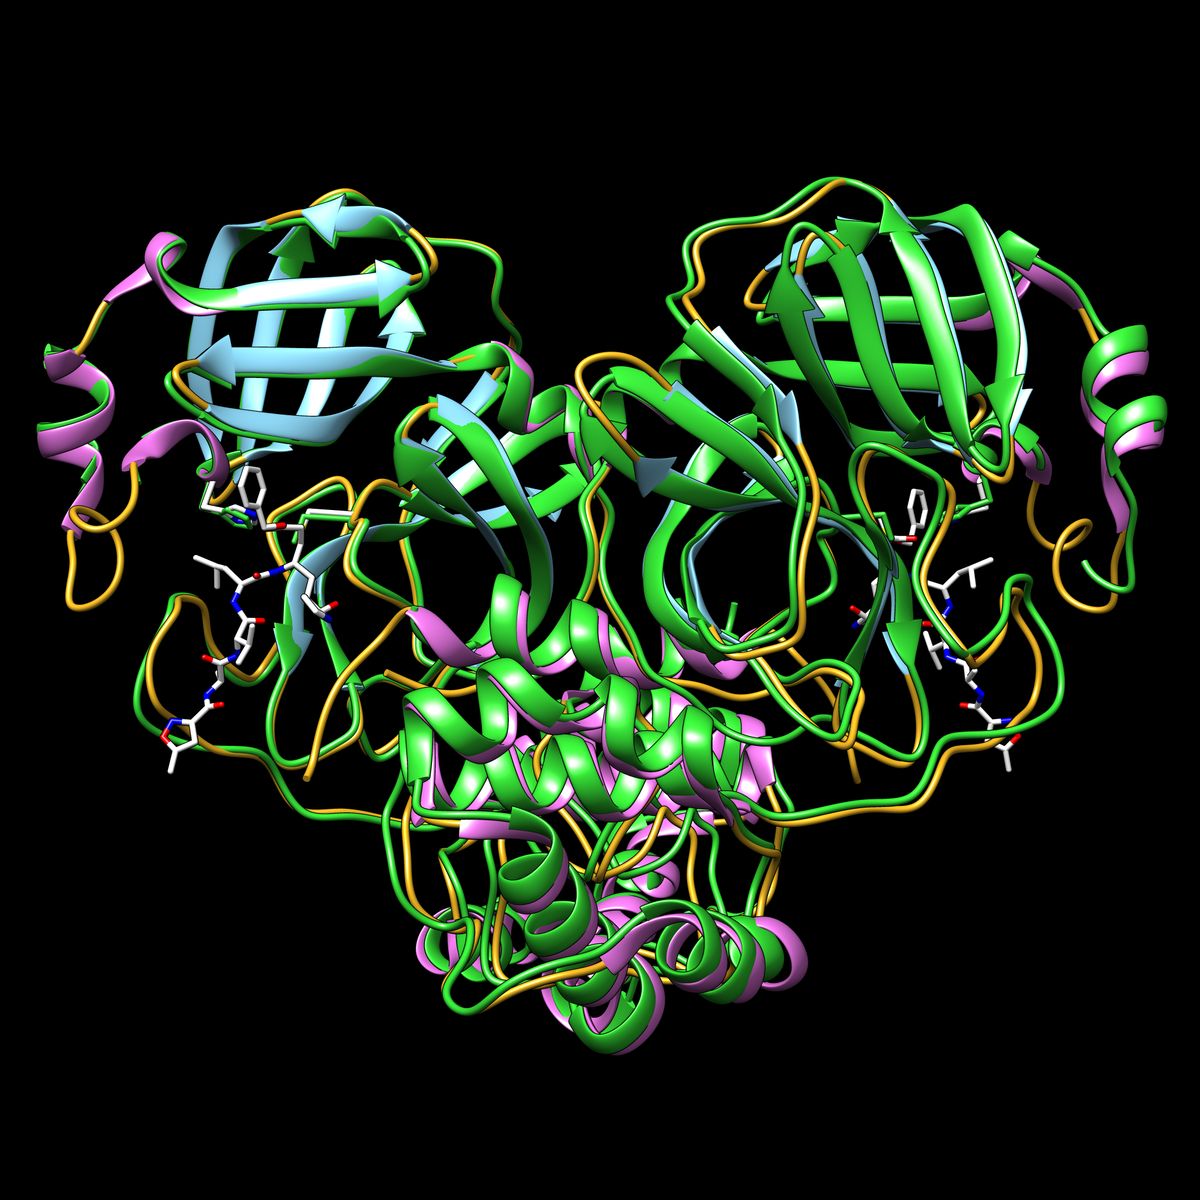 Structural similarity of the SARS-CoV-2  main protease (<a href="https://www.rcsb.org/structure/6LU7">PDB structure 6lu7</a>) and the SARS coronavirus main protease (<a href="https://www.rcsb.org/structure/1q2w">PDB structure 1q2w</a> in green)<BR>
<a href="https://youtu.be/APCadT6ynyI"><B>Video</B></a>